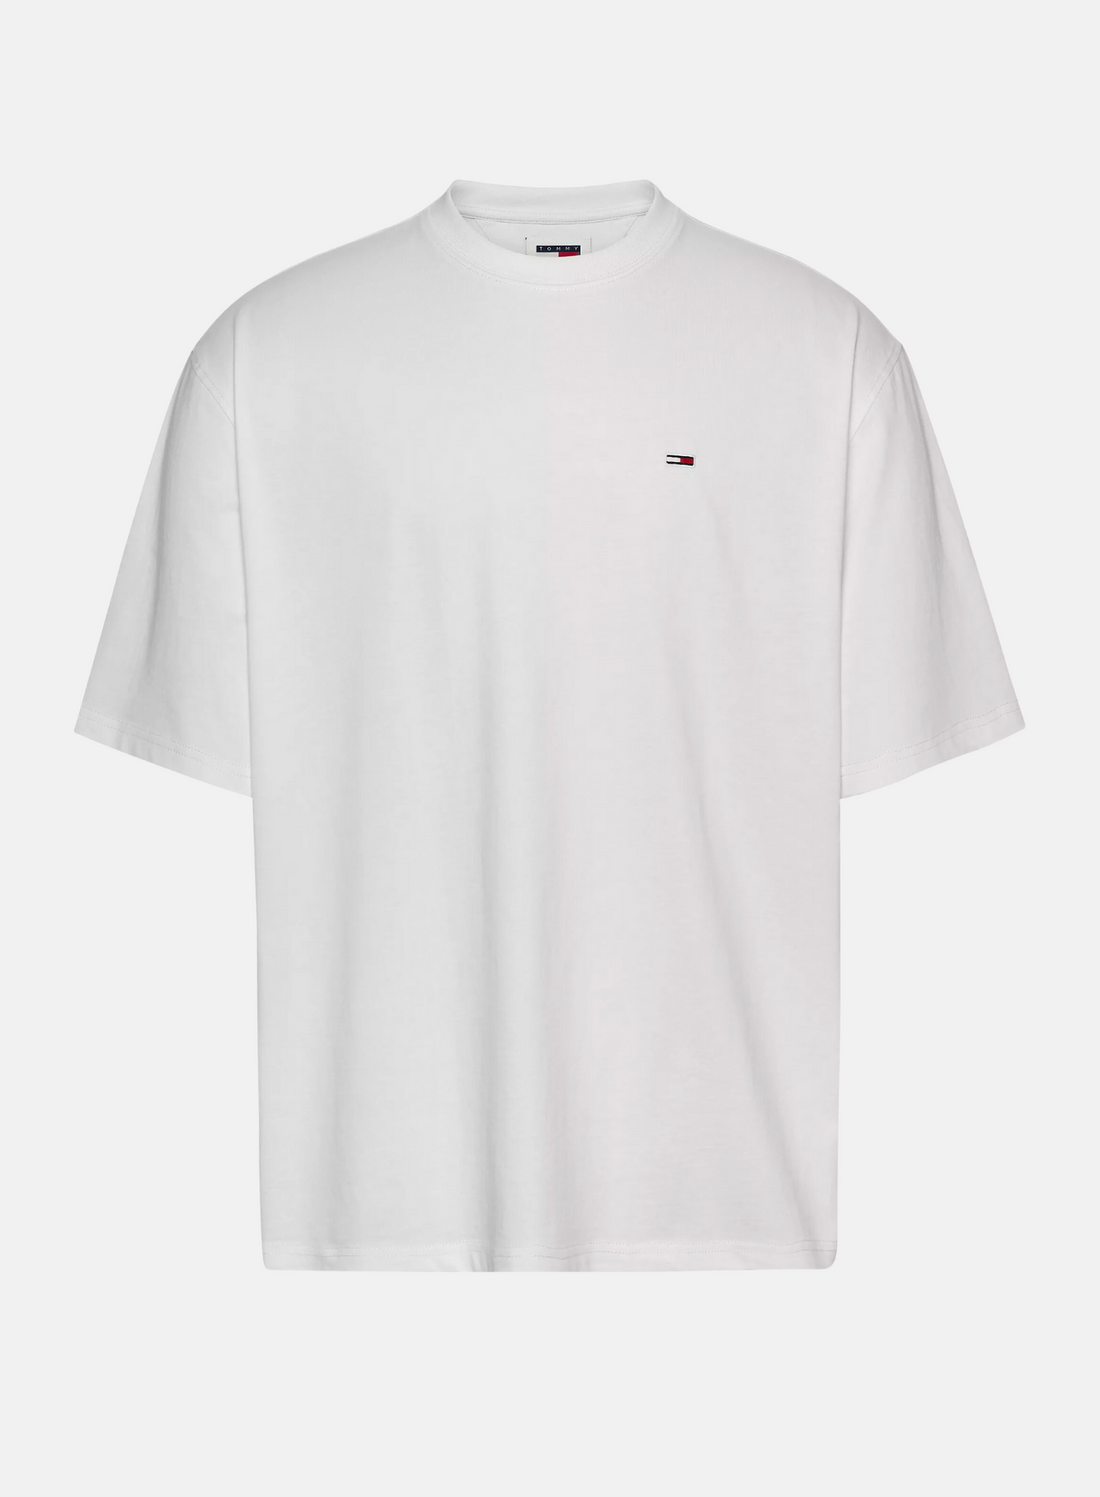 Tommy Jeans Classic Oversized Solid Tee White - Hympala Store 